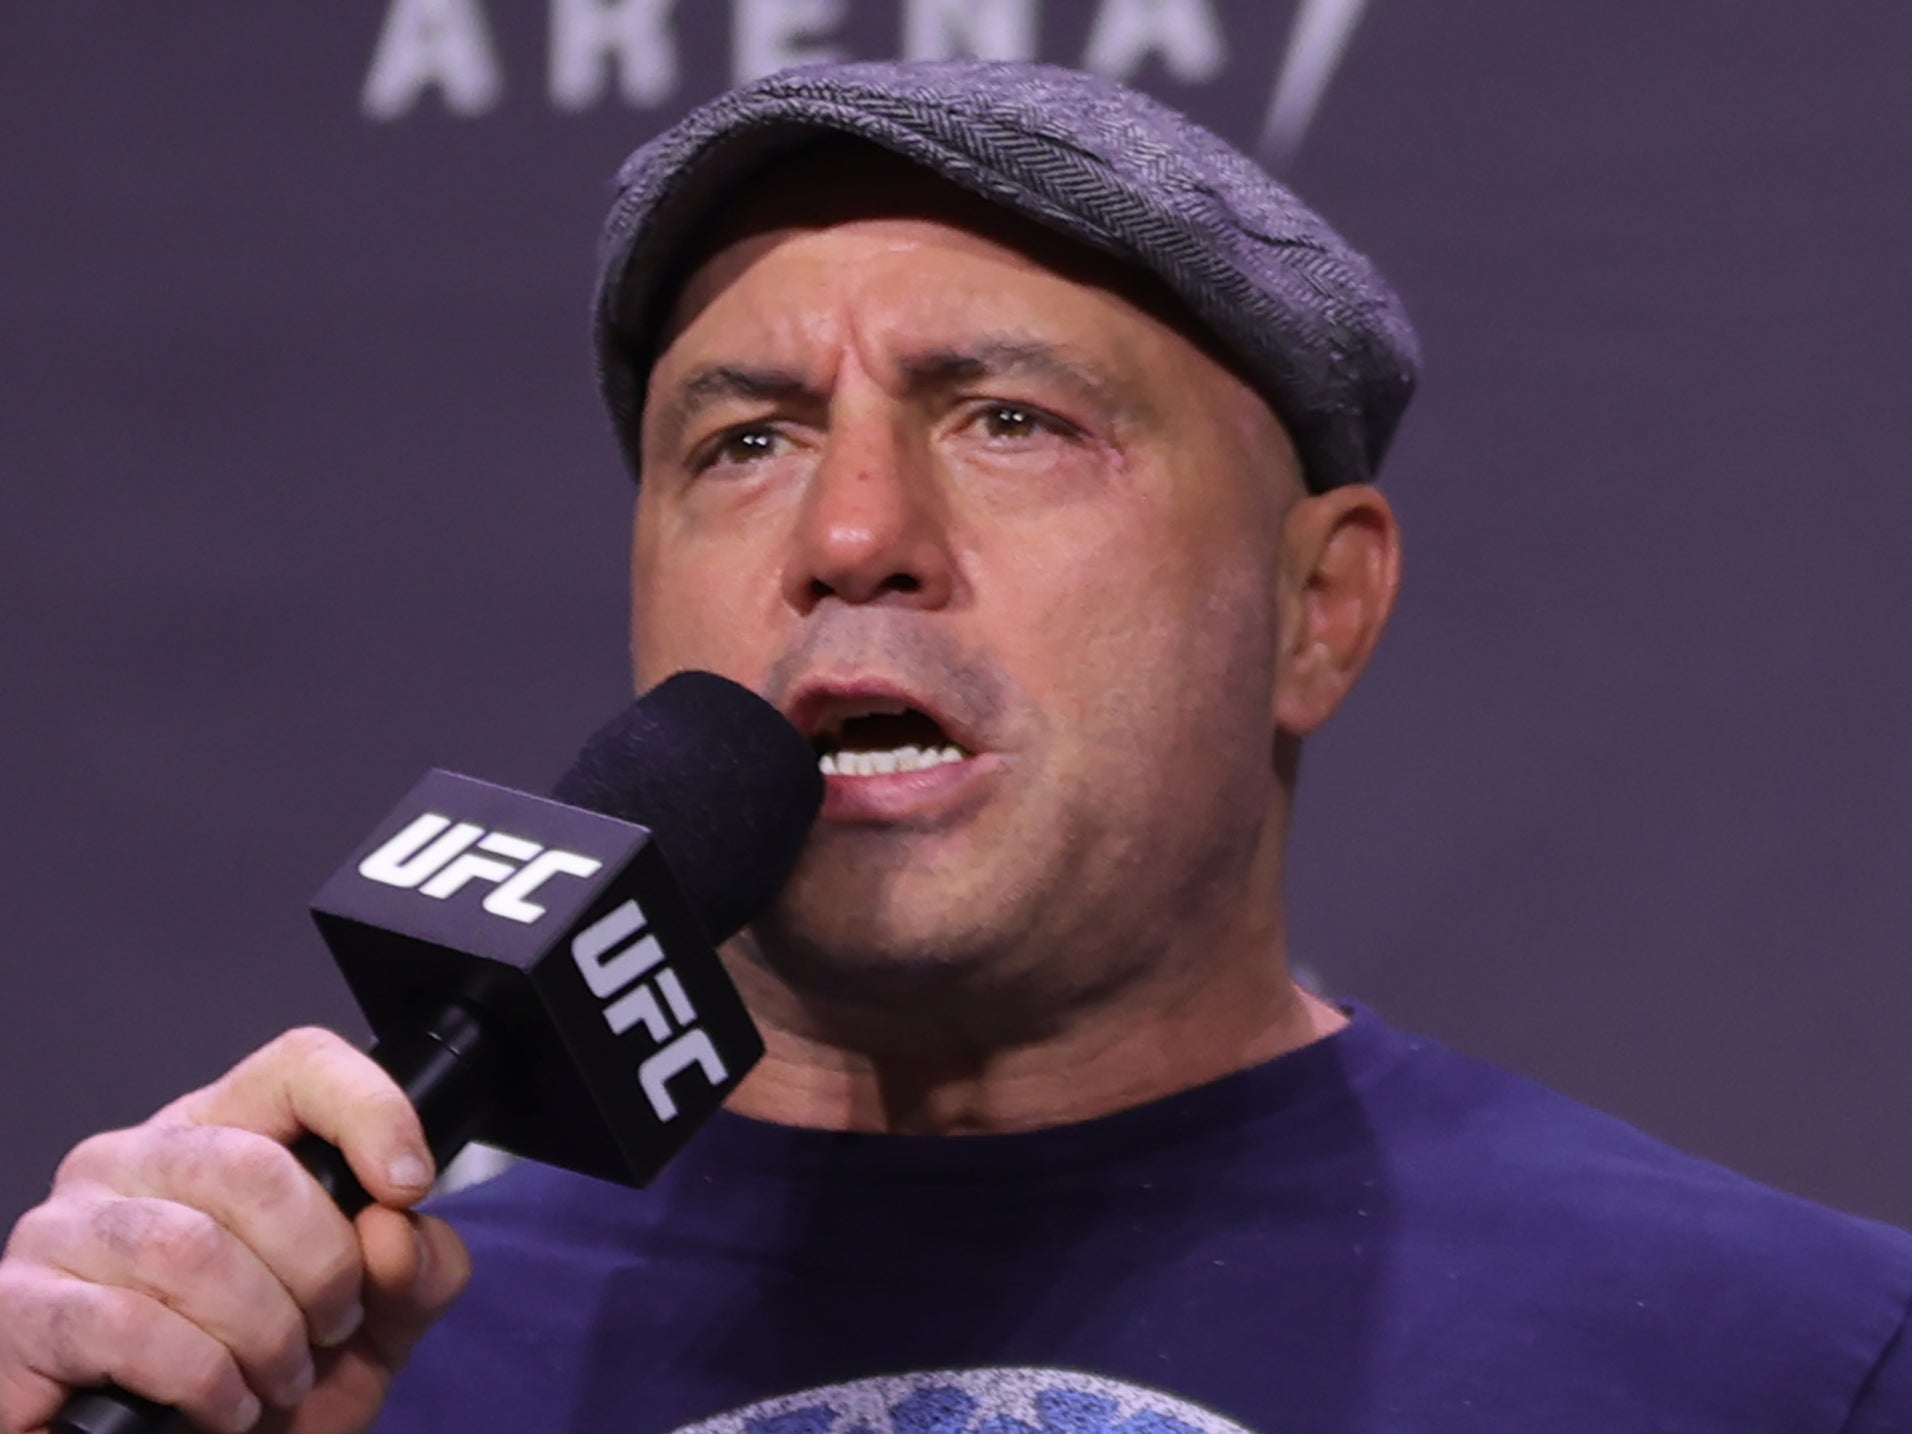 Joe Rogan has apologised for resurfaced clips showing him using the N-word multiple times